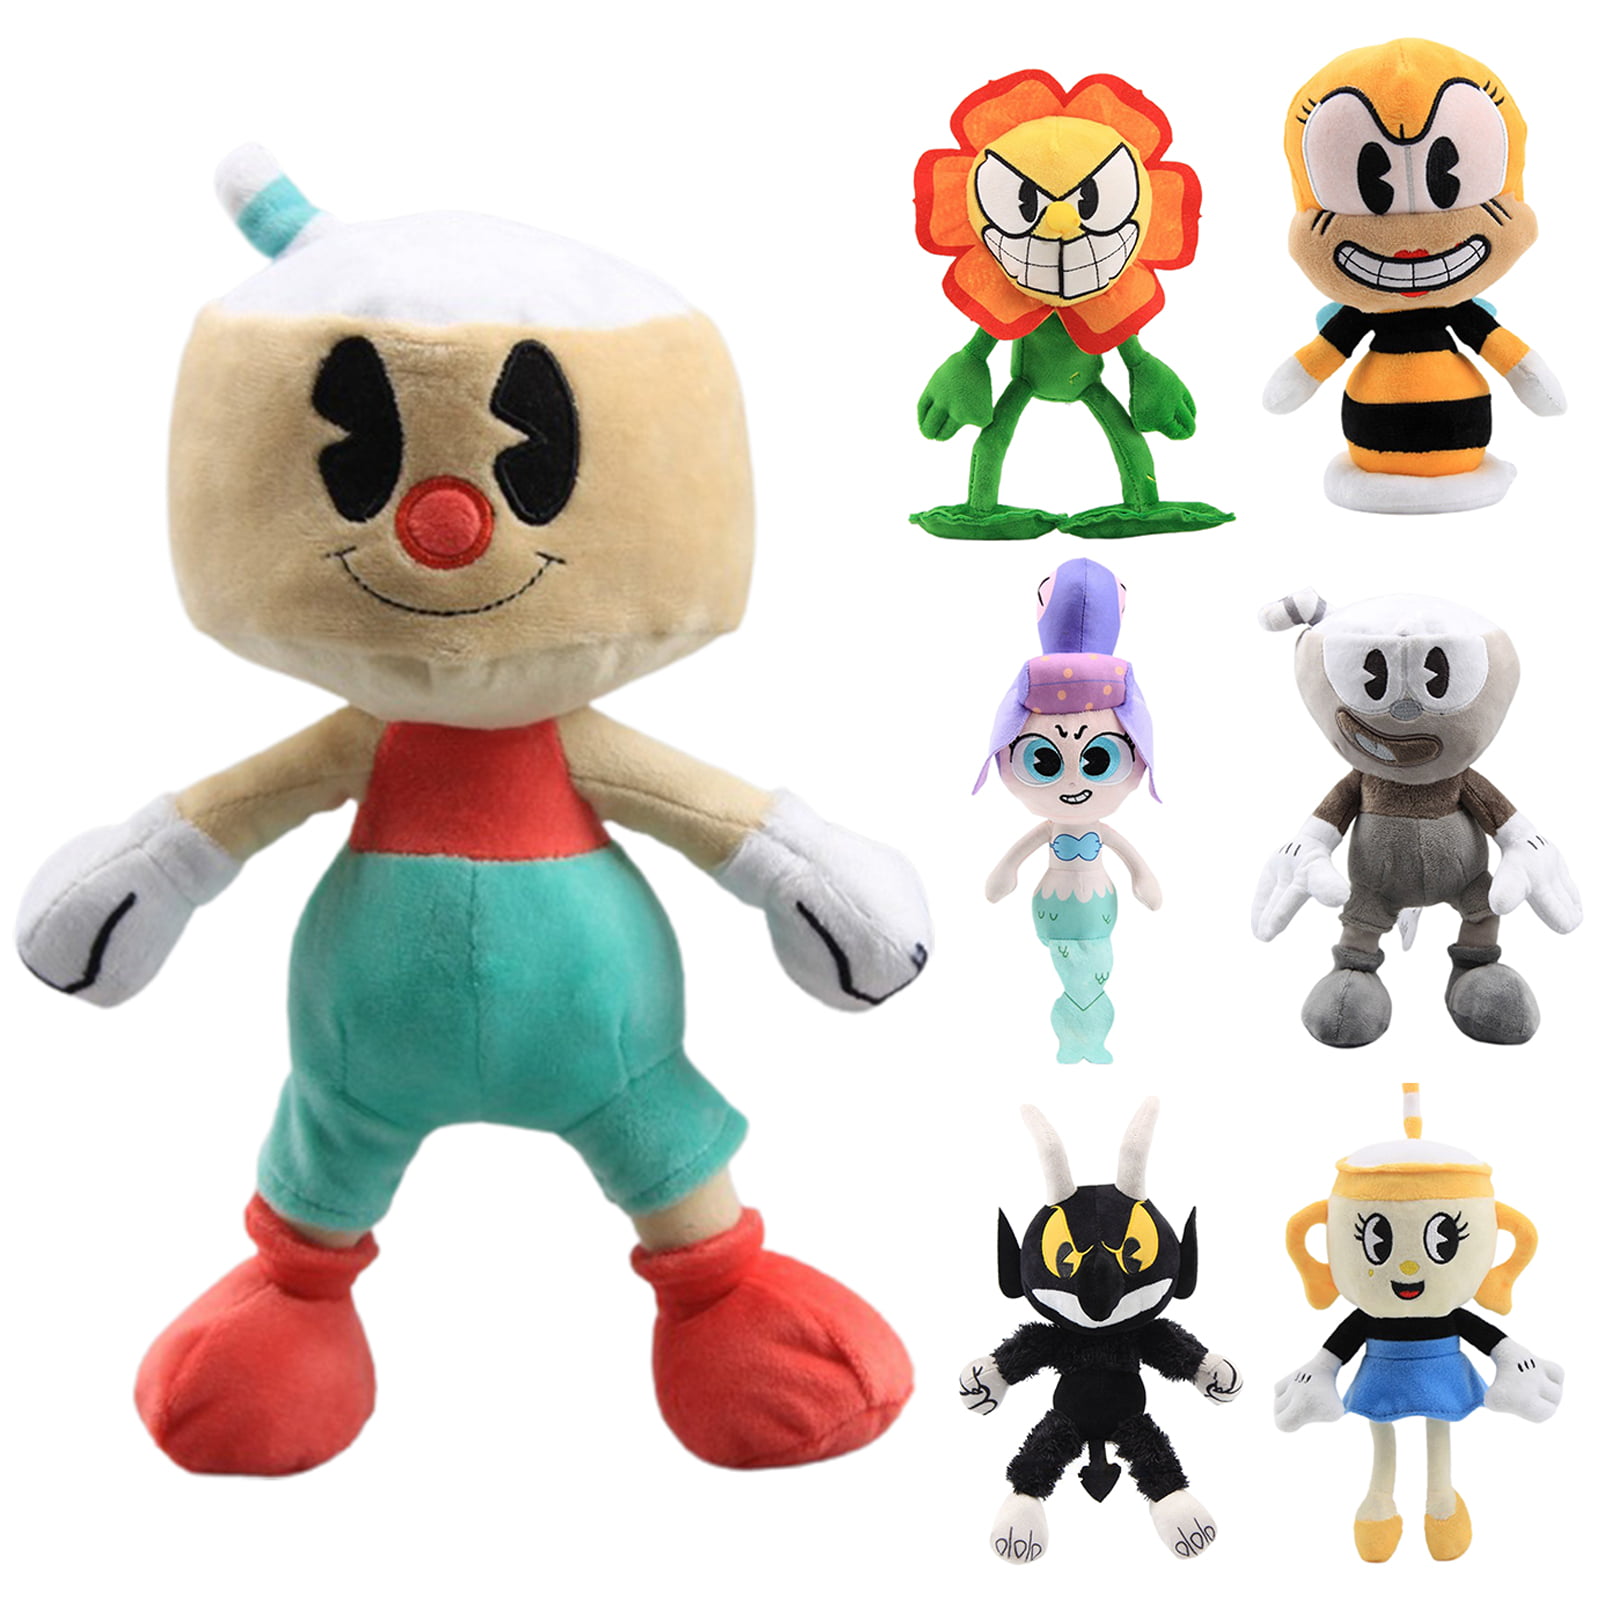 Chalice Plush Figure Toy Soft Stuffed Doll for Kids Gift 8 inch Cuphead Game Ms 